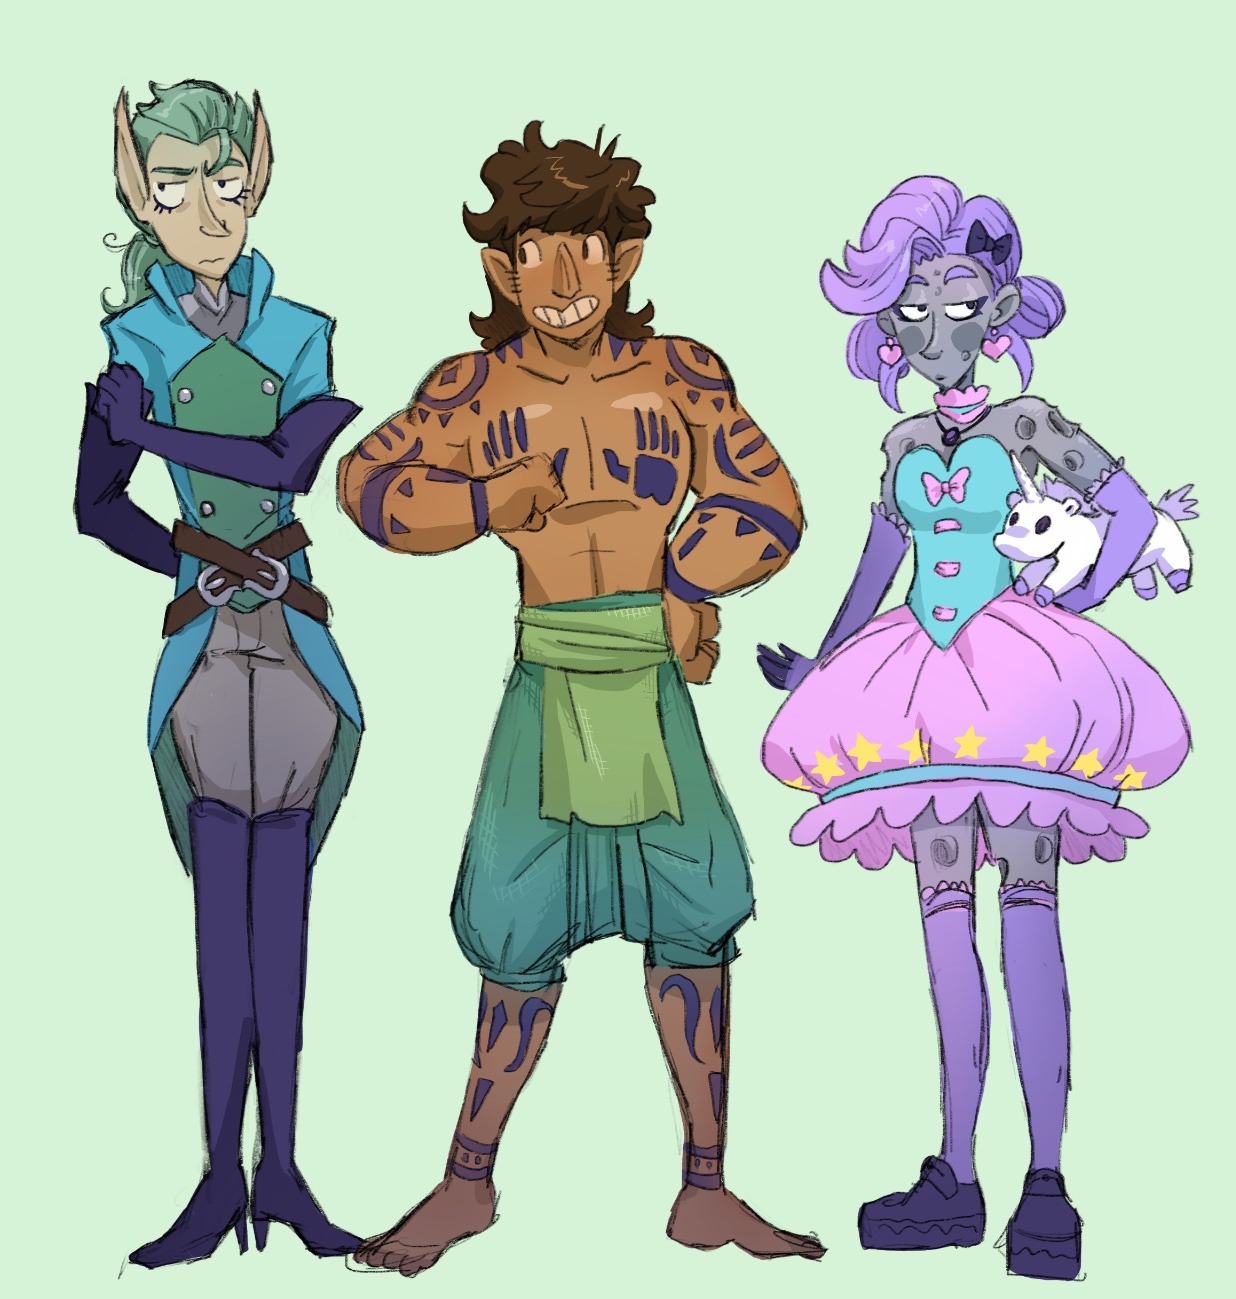 mandiminimojo:
“ Cleaned up an old doodle of Retrieval Team 22 while listening to the new Trinyvale episode.
(If y’all aren’t listening to NADDPod already, give it a listen!!)
”